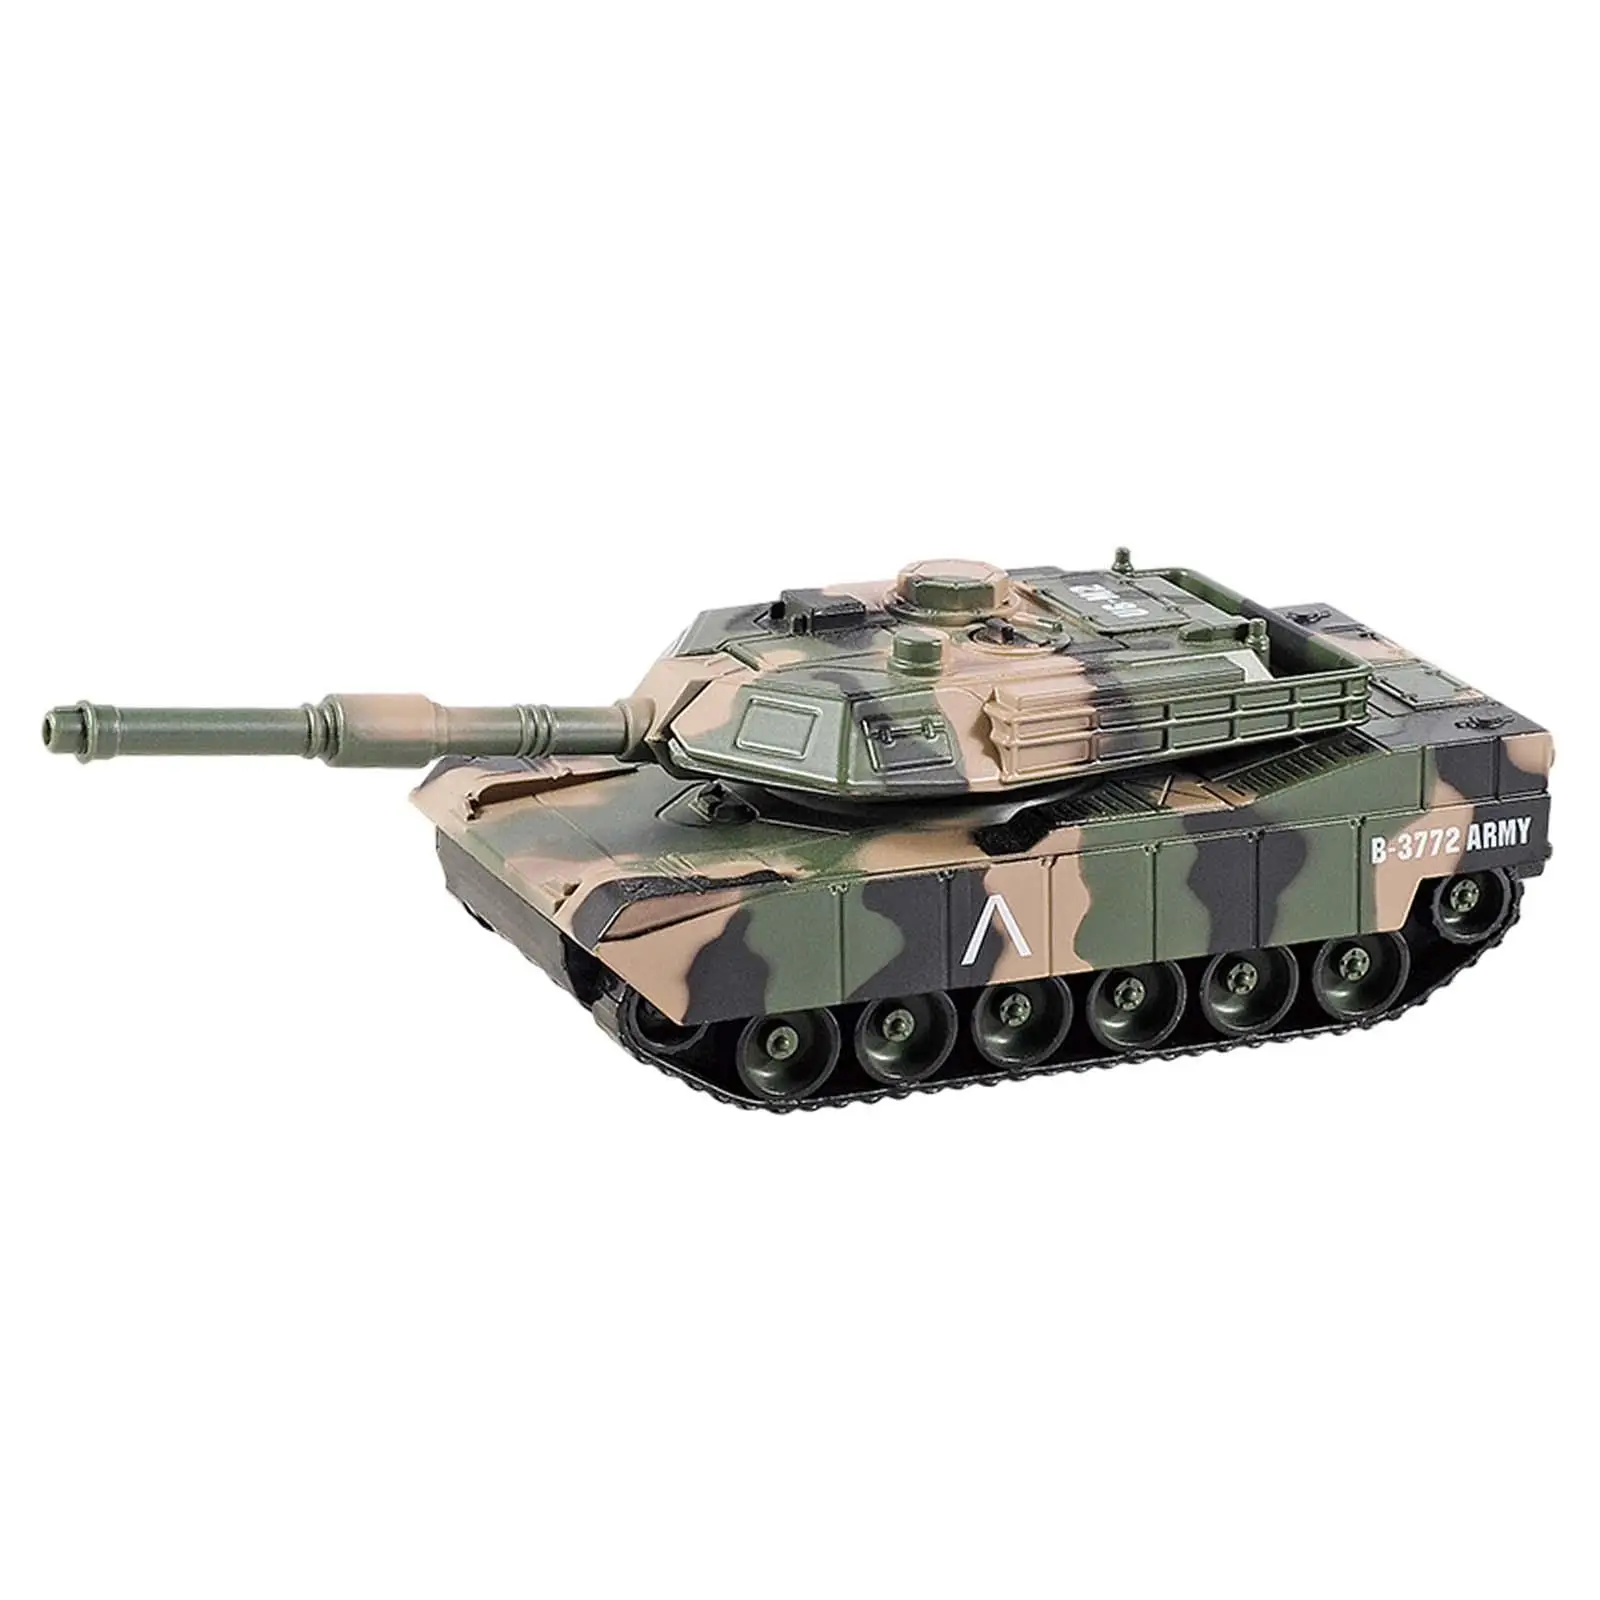 1/24 Tank Toy Pullback Motion Party Favors Creative Pull Back Tank Toy Alloy Diecast Tank for Kids Boys Girls 3-7 Years Old Gift